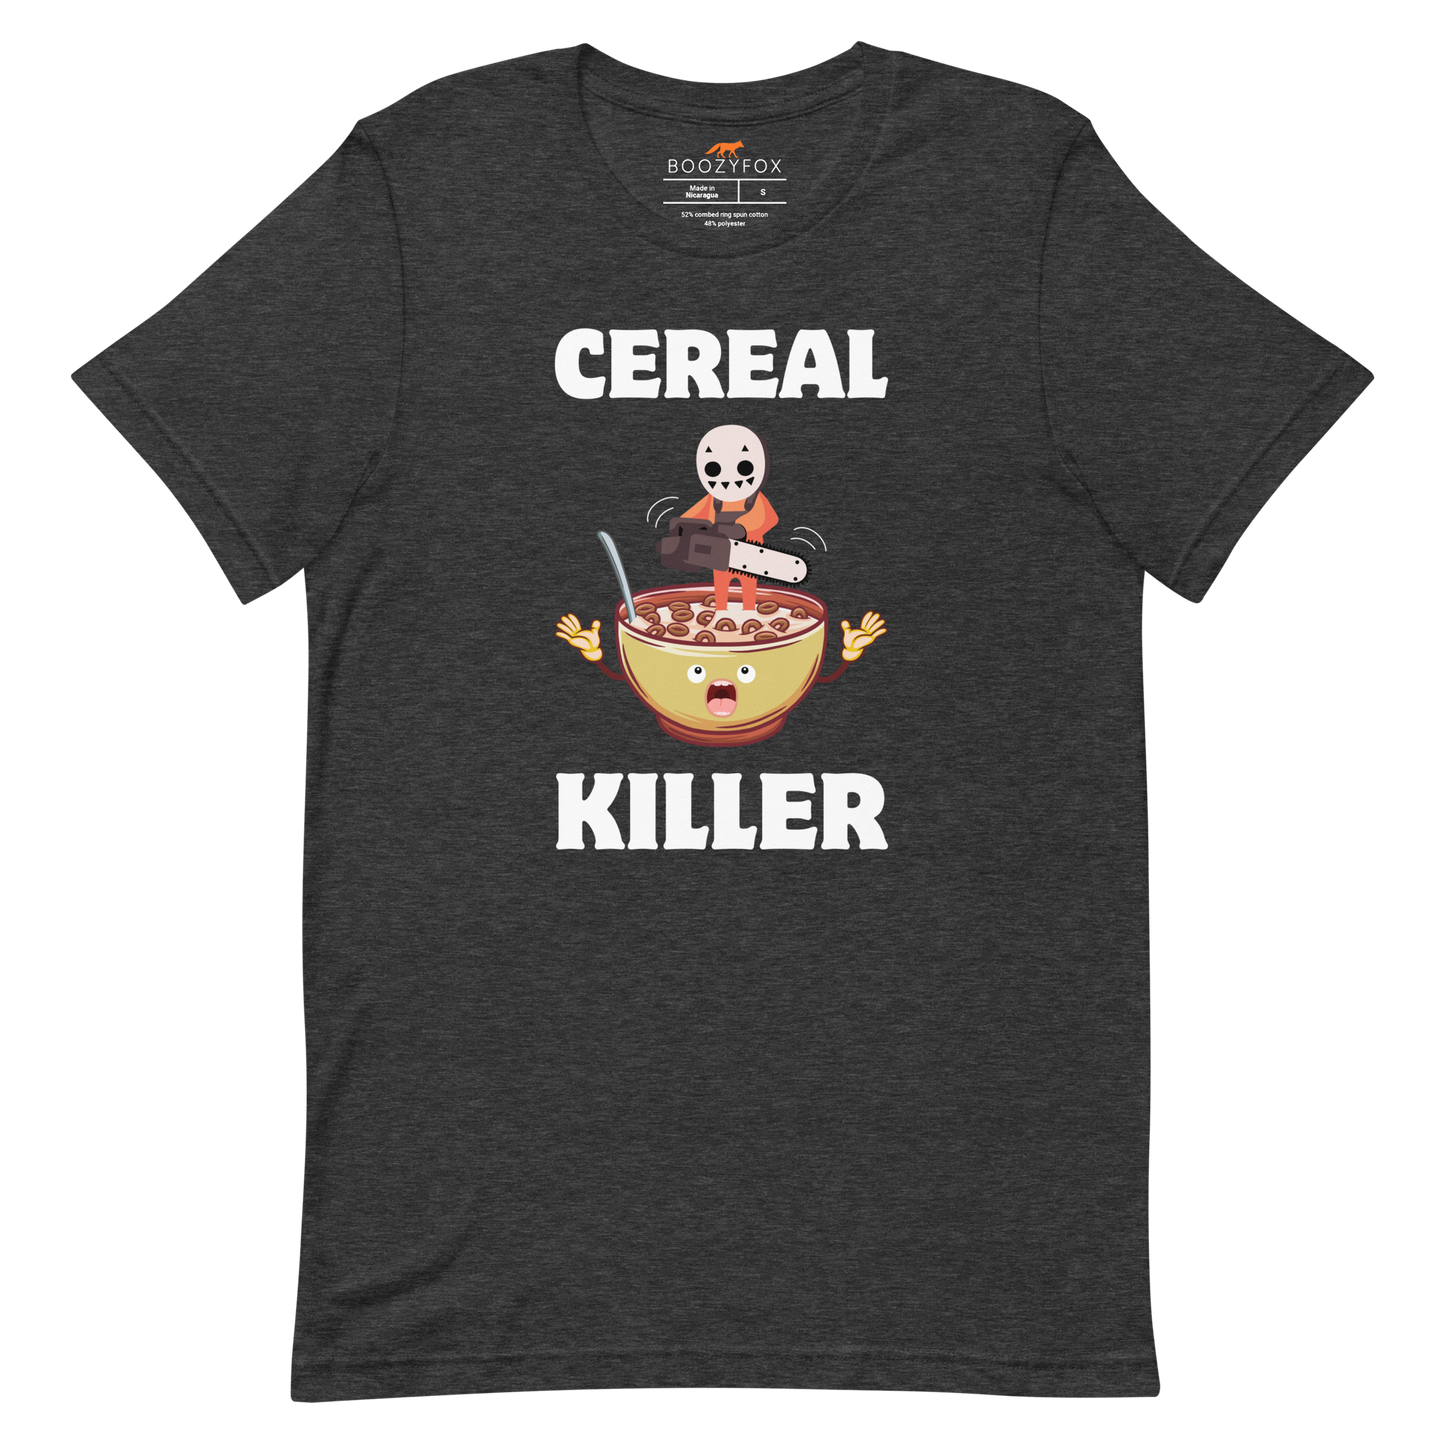 Dark Grey Heather Premium Cereal Killer Tee featuring a Cereal Killer graphic on the chest - Funny Graphic Tees - Boozy Fox